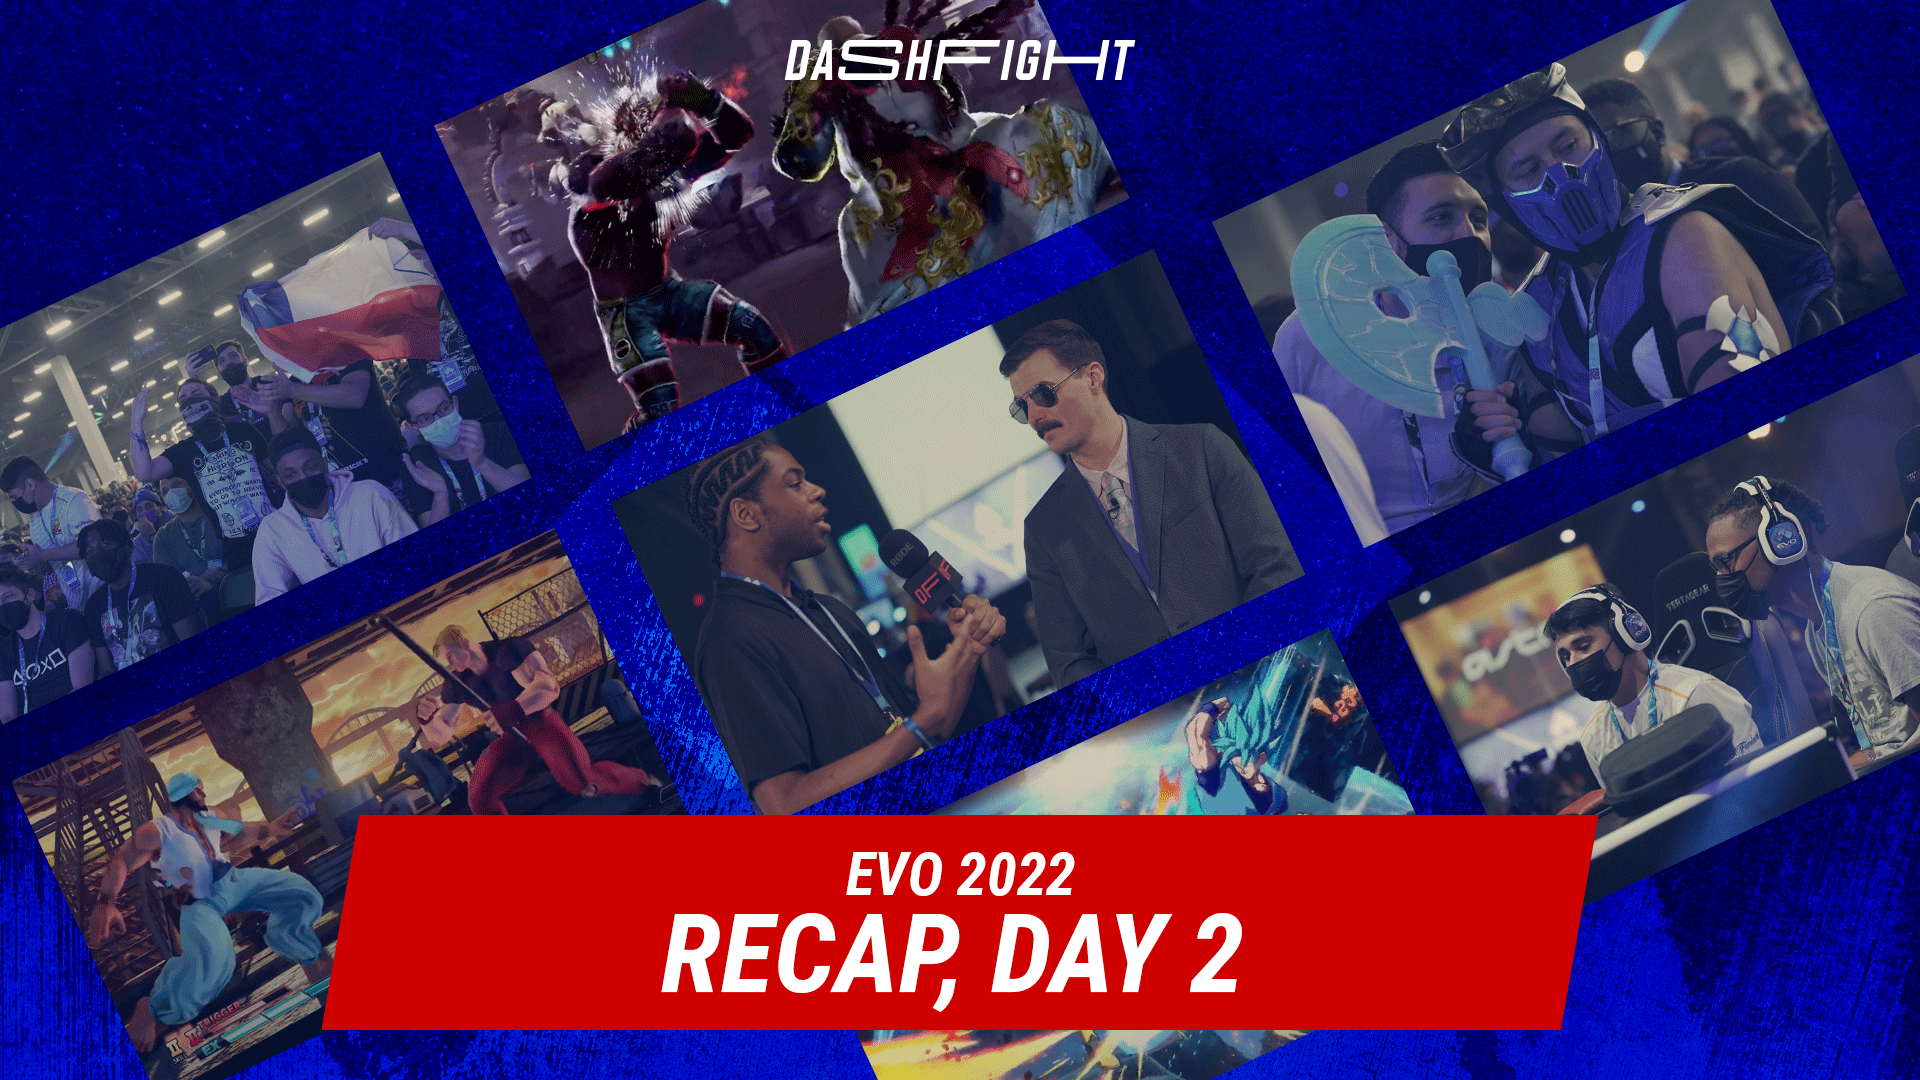 What Went Down During Day 2 of Evo 2022